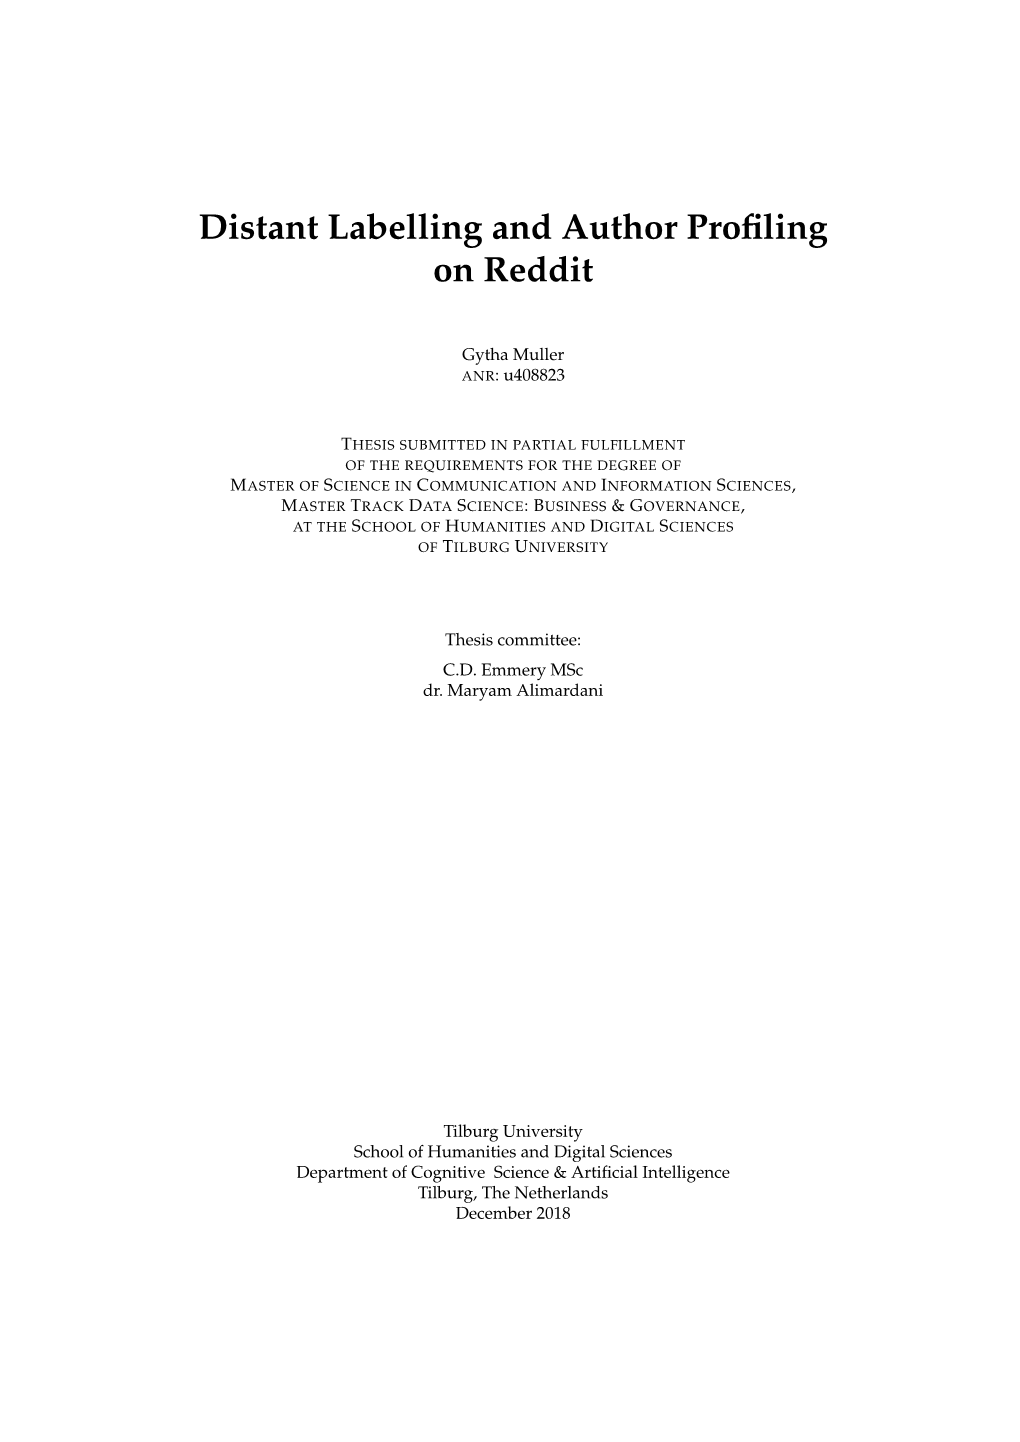 Distant Labelling and Author Profiling on Reddit